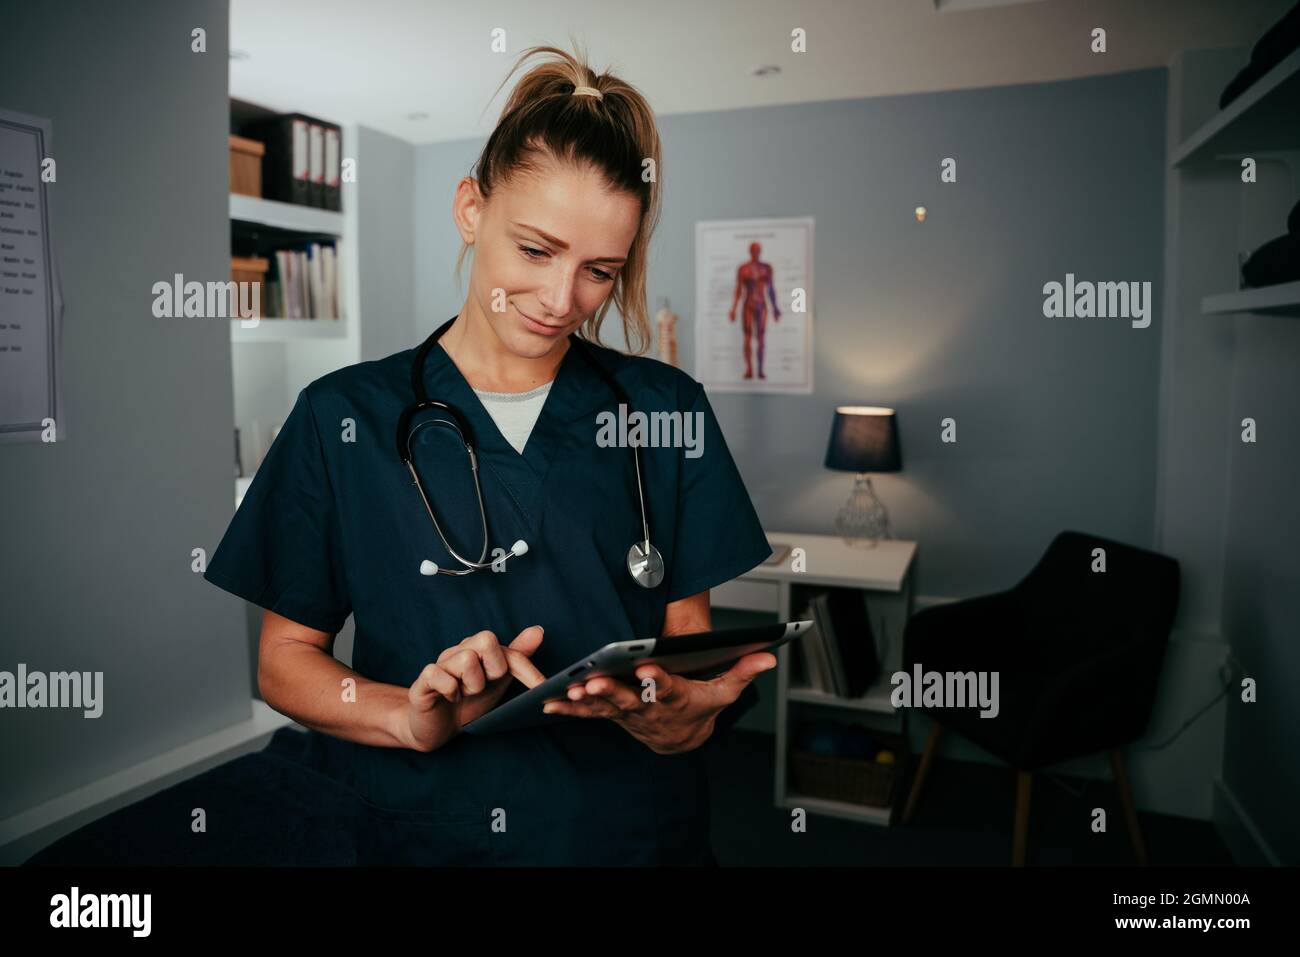 Caucasian female doctor working in clinic typing on digital tablet Stock Photo